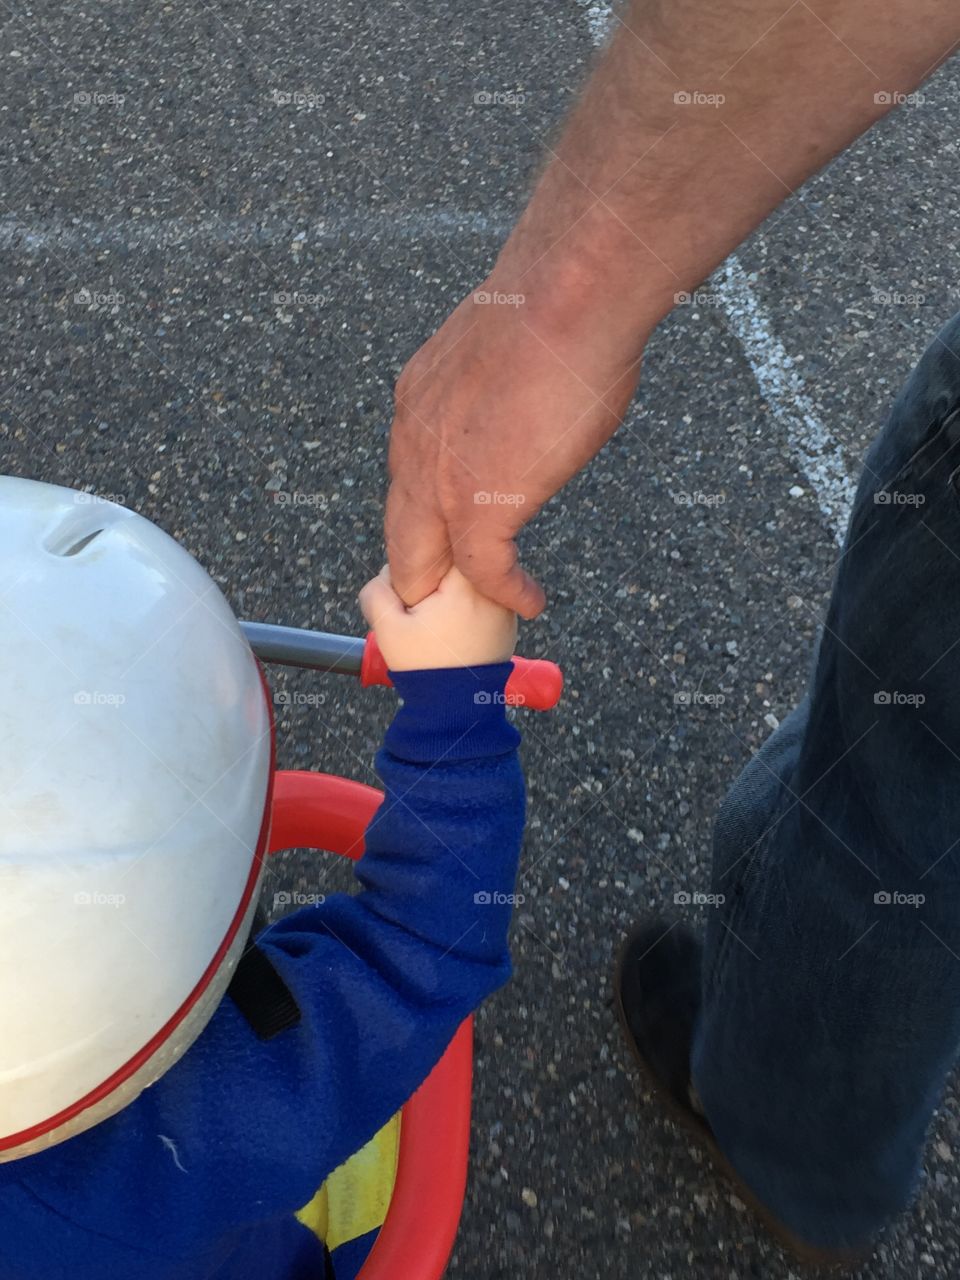 Our grandson loves to hold hands when outside weather he's in his stroller, on his bike or walking along. 